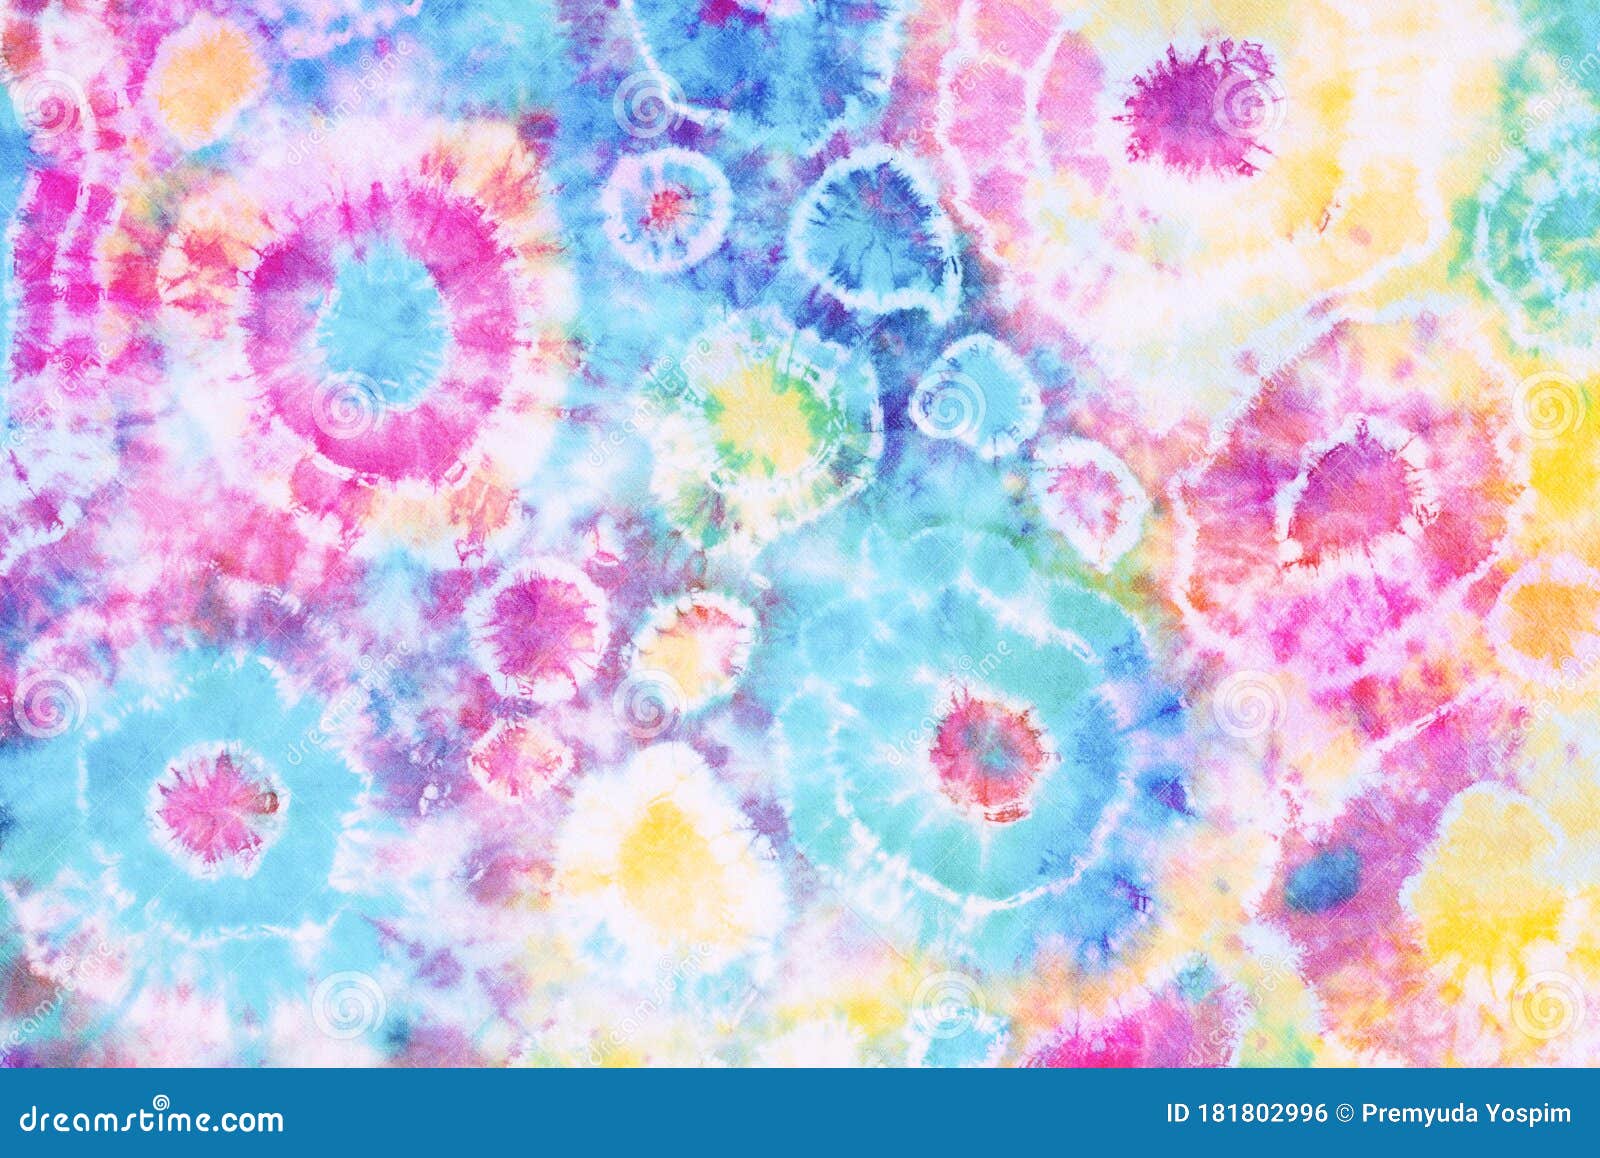 Colorful Tie Dye Pattern Abstract Texture Background Stock Photo - Image of  bright, blue: 181802996